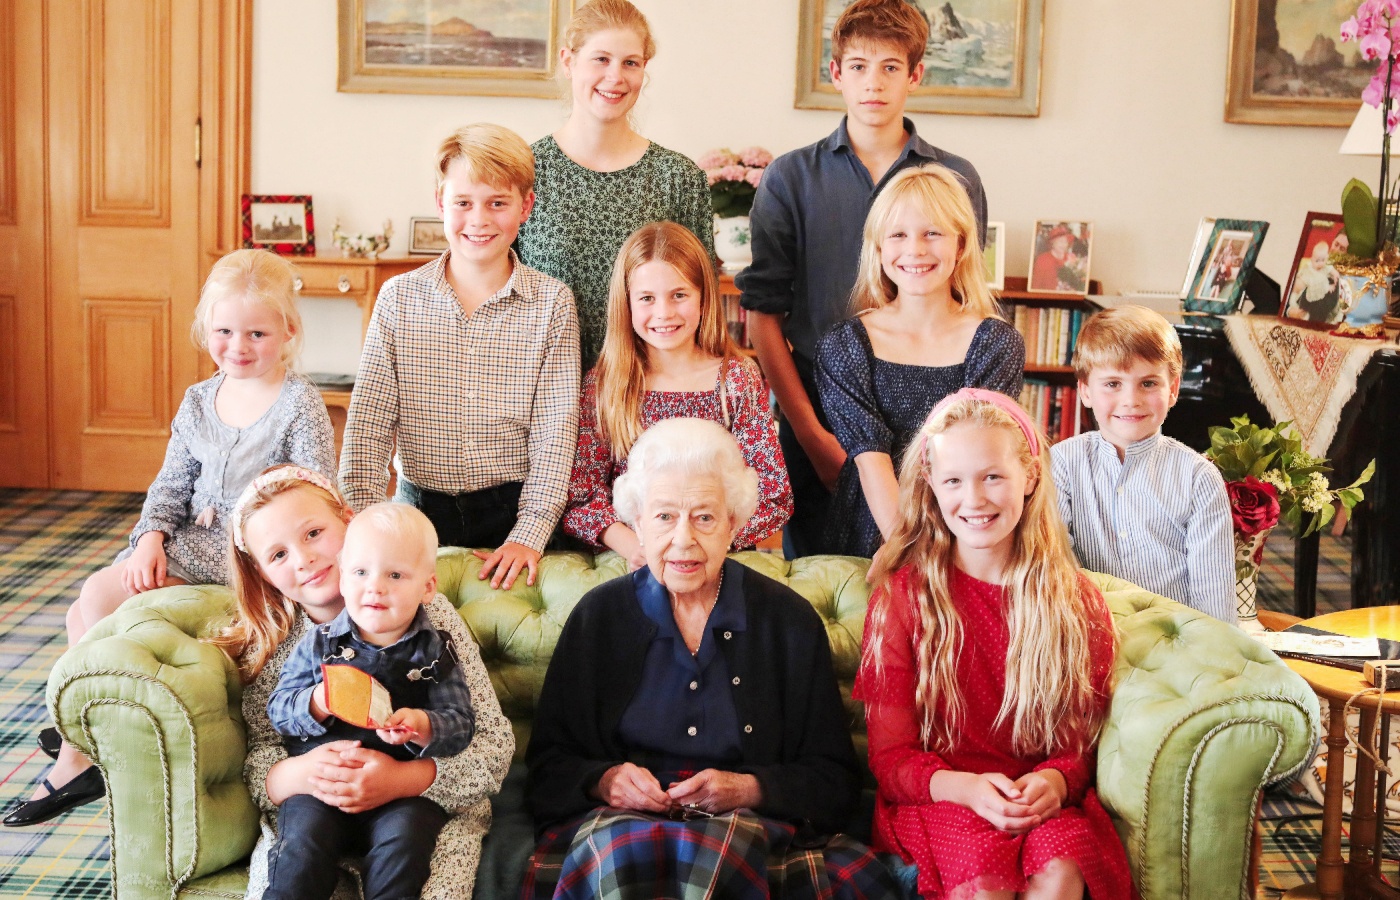 Photograph showing Queen Elizabeth with some of her grandchildren and great grandchildren at Balmoral.